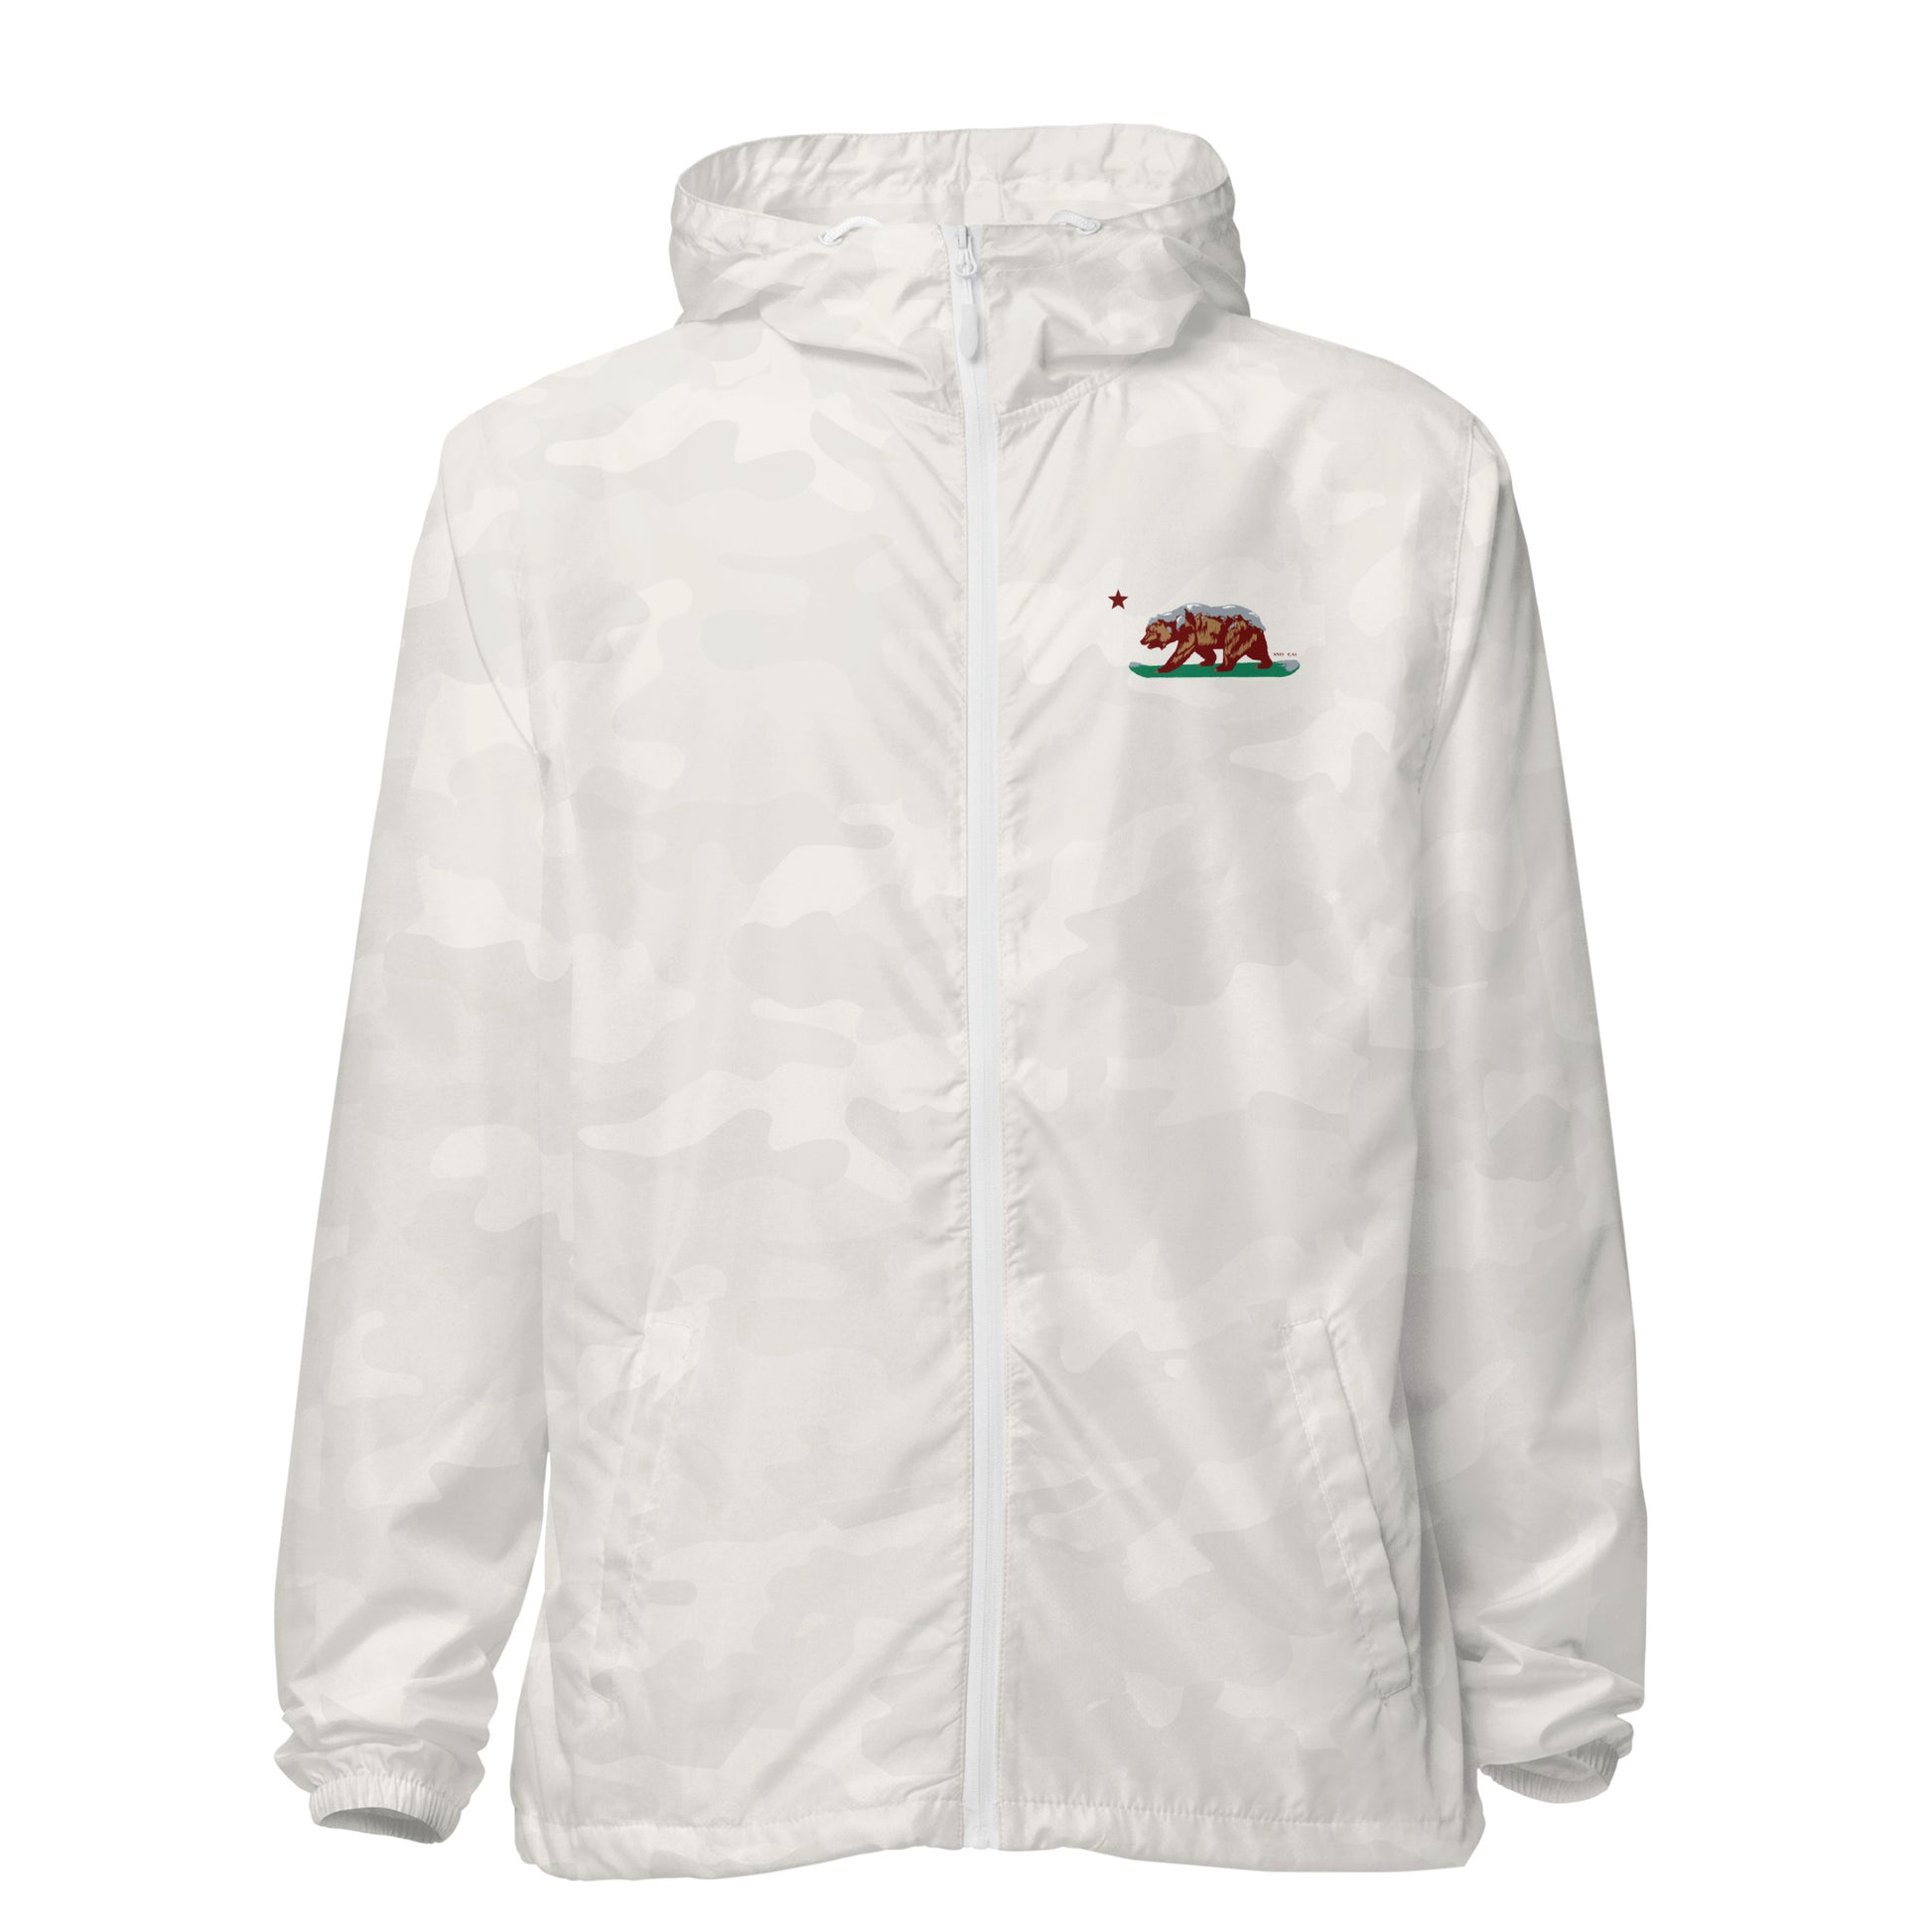 white Camouflage California grizzly bear windbreaker